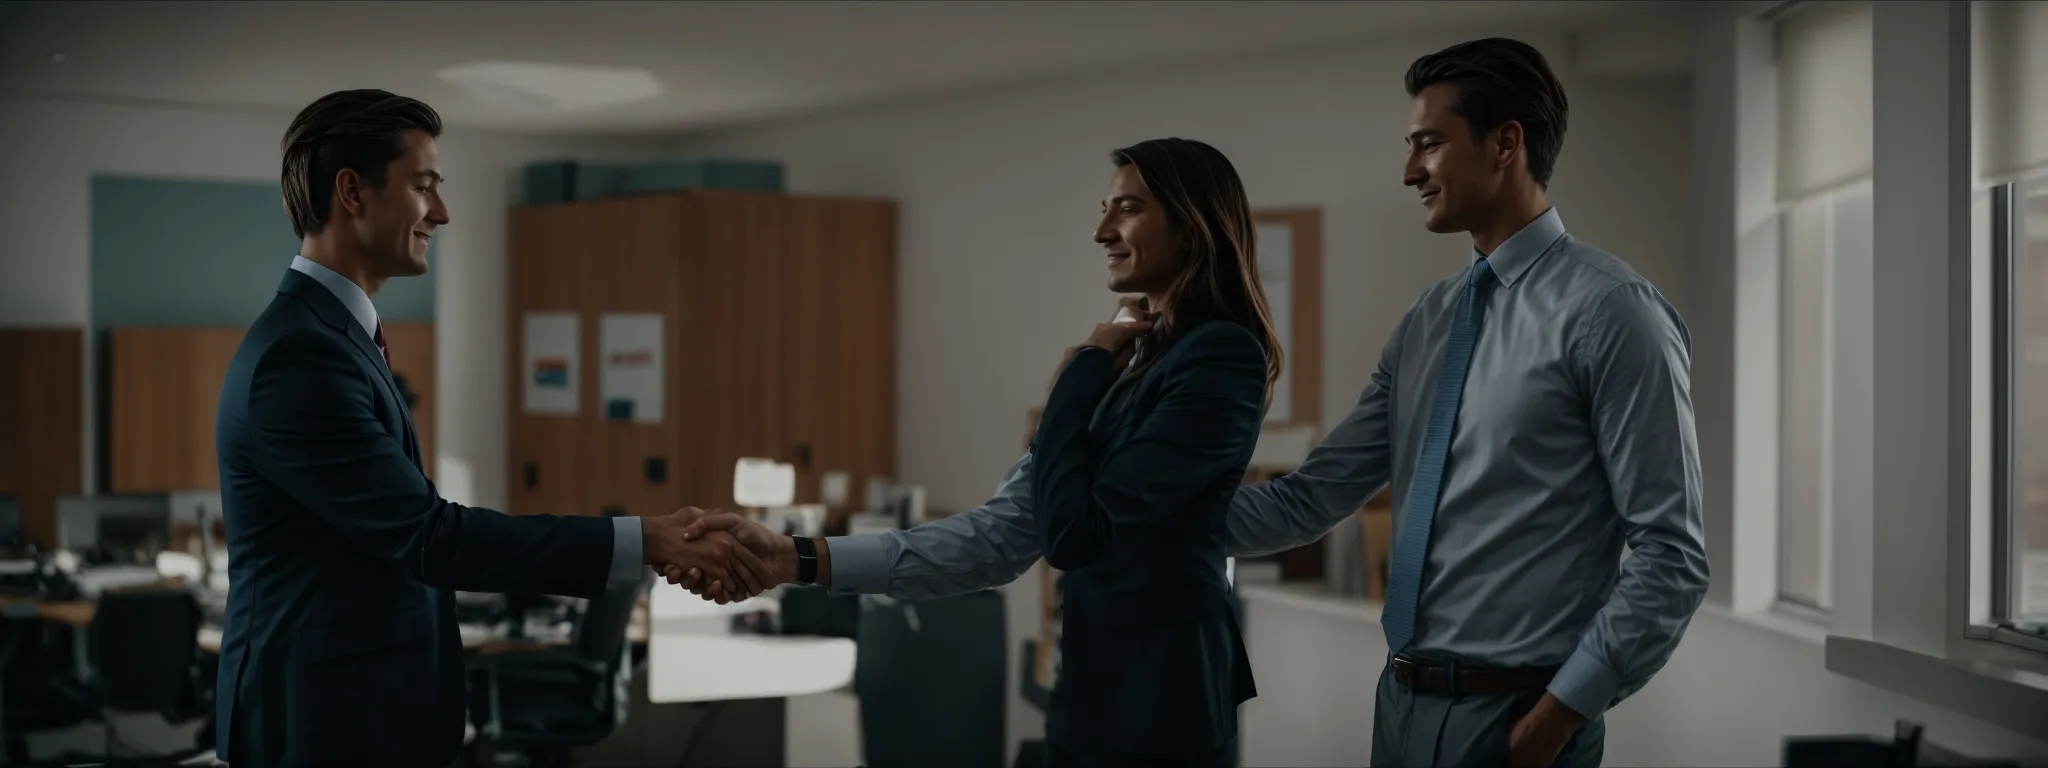 two professionals shaking hands in a bright office, symbolizing the beginning of a partnership.